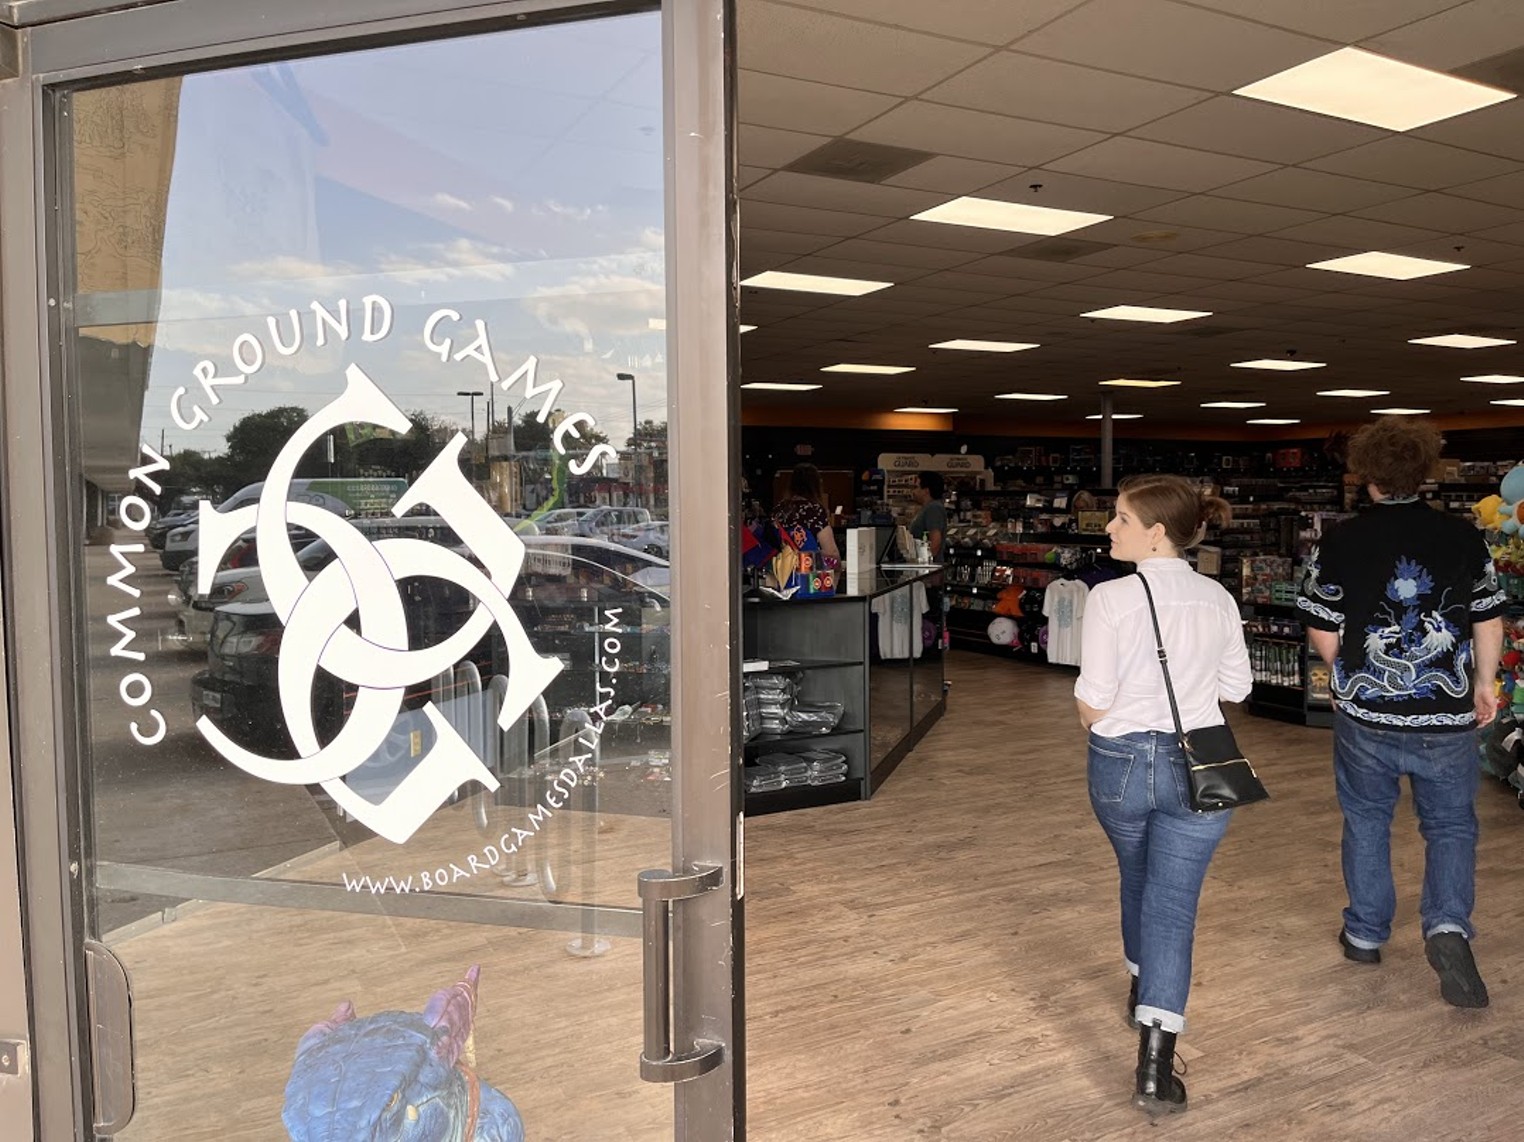 Board Game Emporium Common Ground Games Expands With a Massive Space